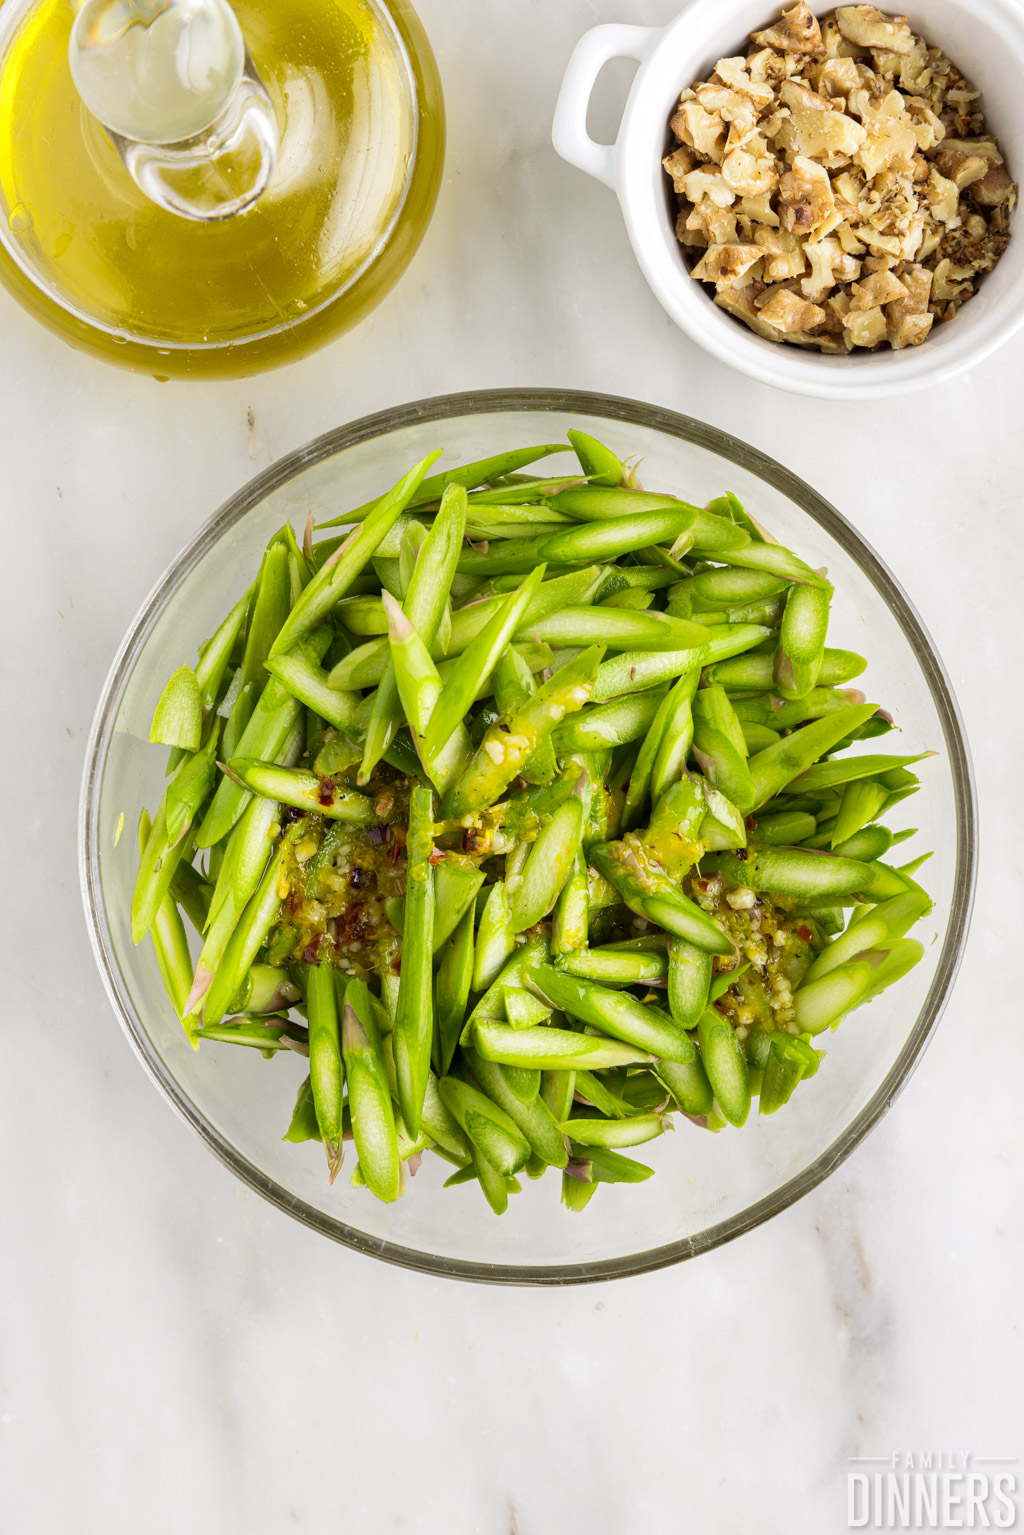 Dressing on asparagus in bowl.